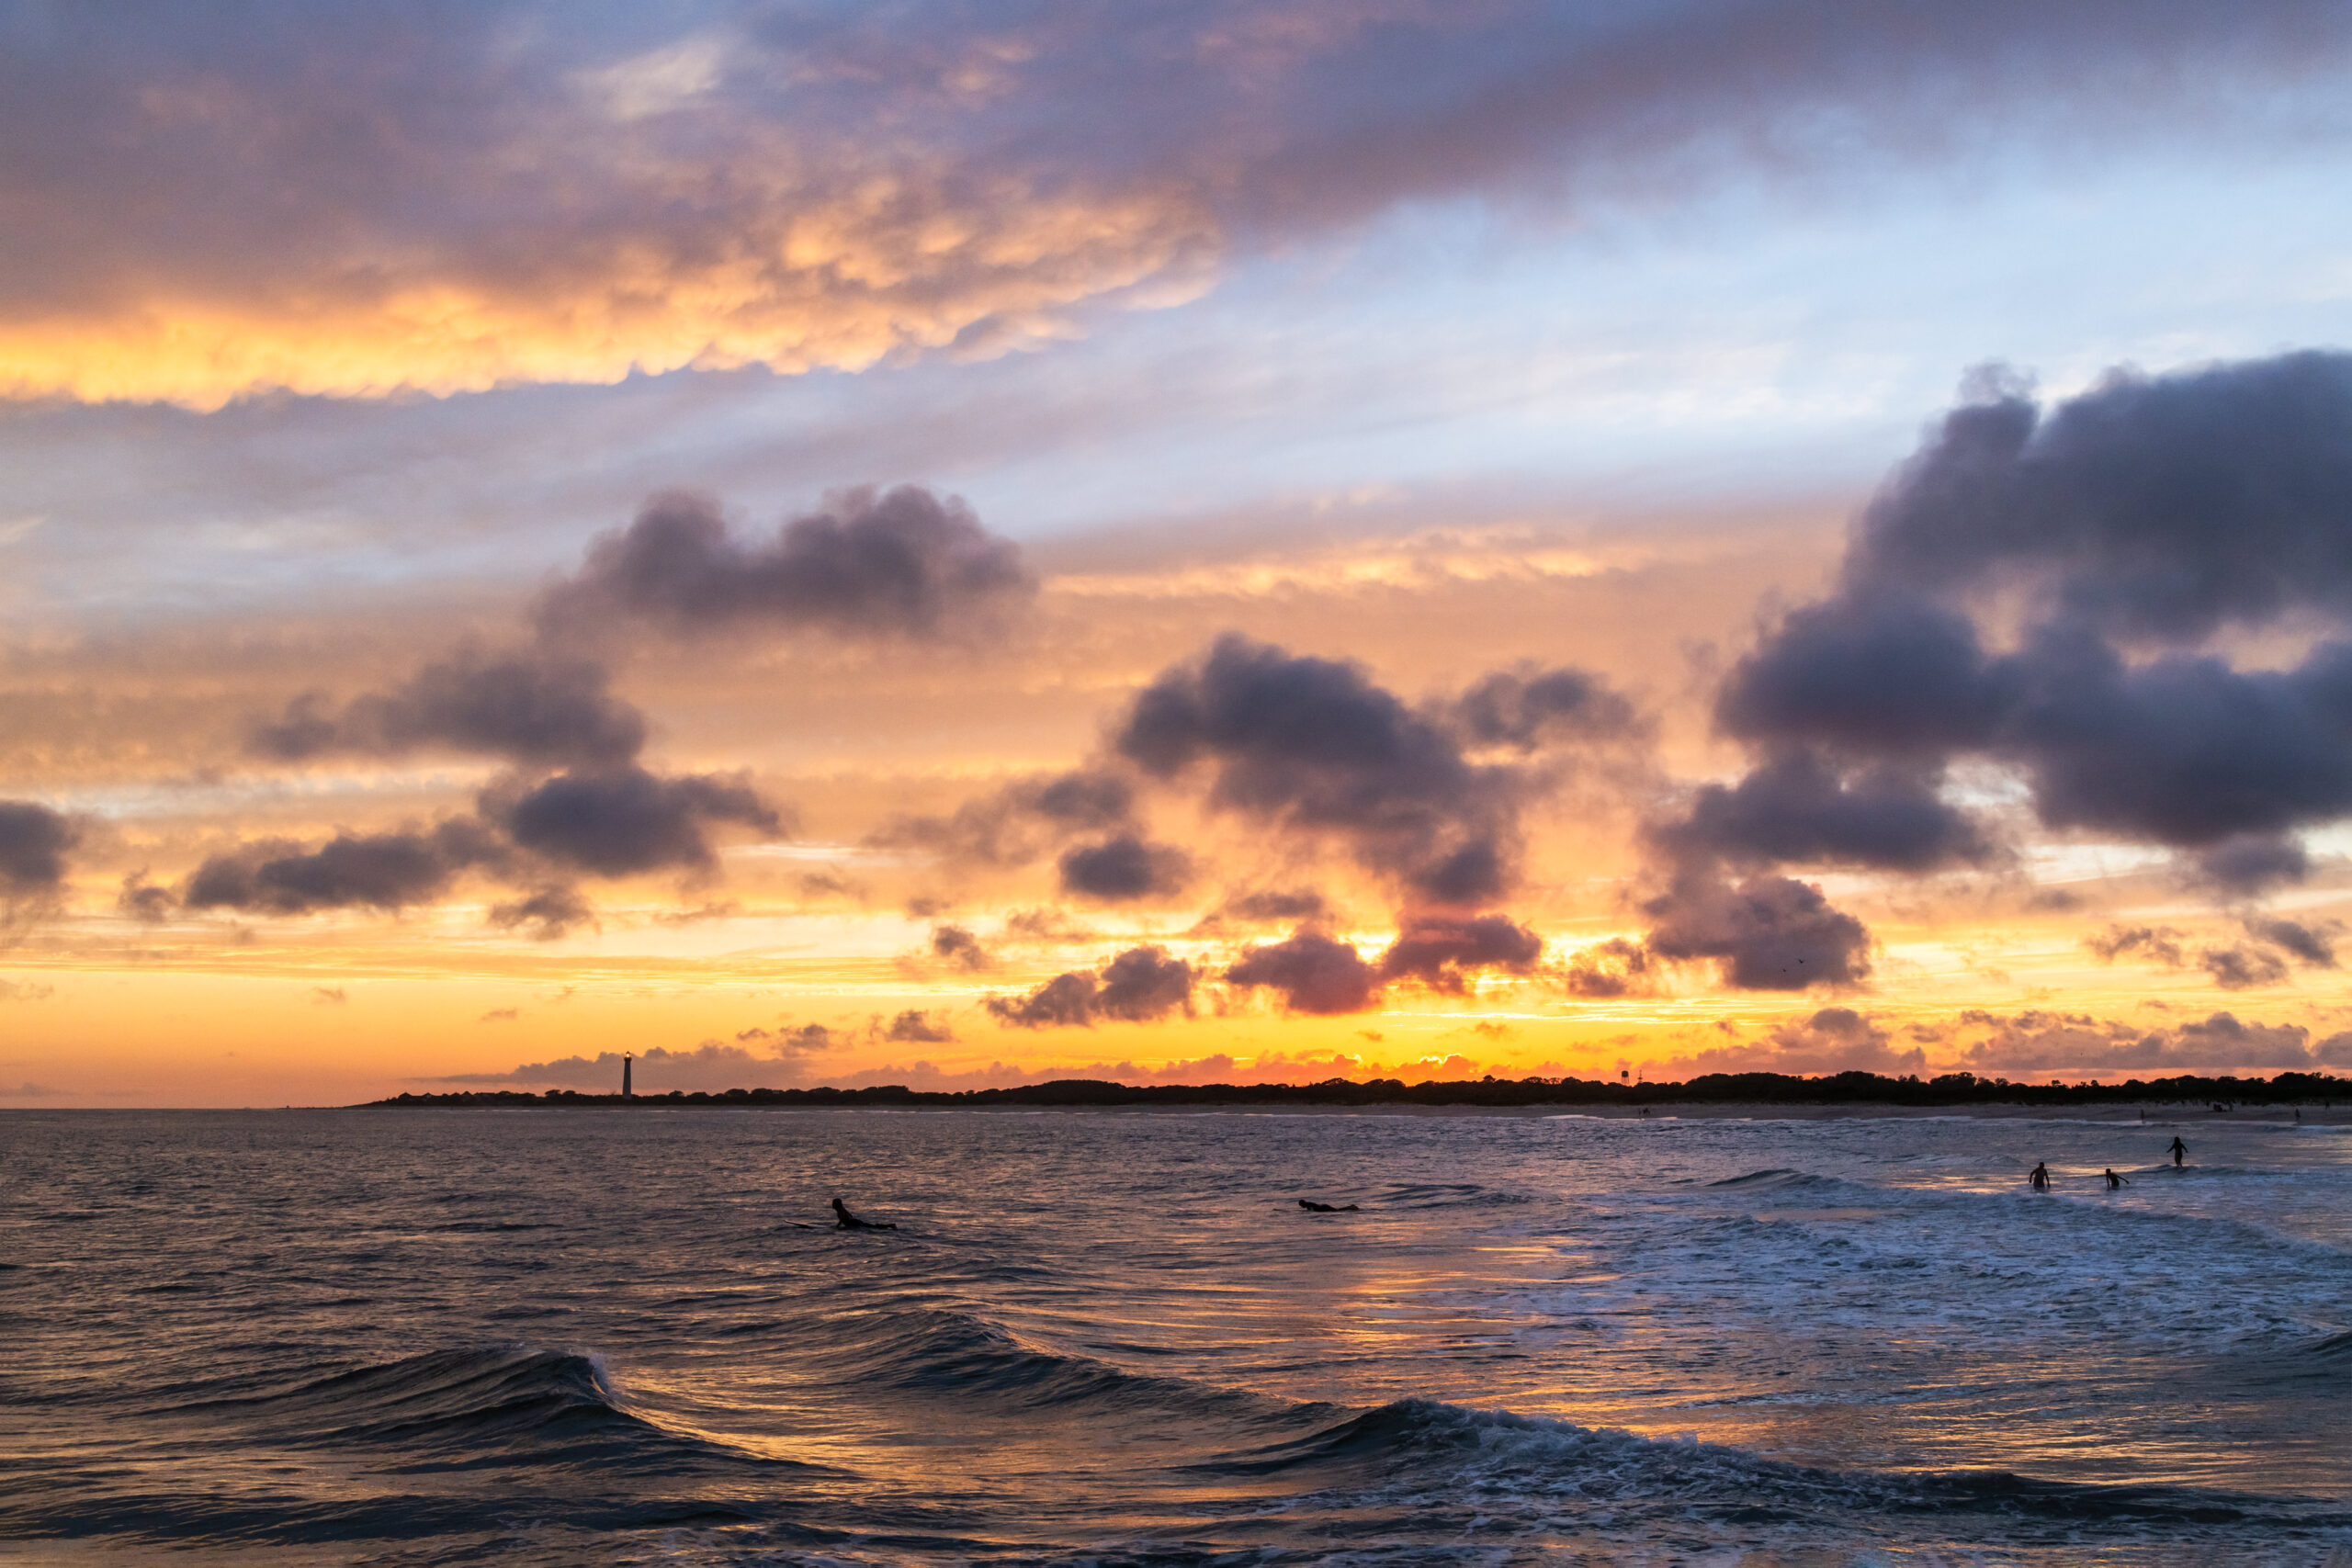 Colorful and dramatic clouds in the sky at sunset with waves rolling in and the Cape May Lighthouse in the distance